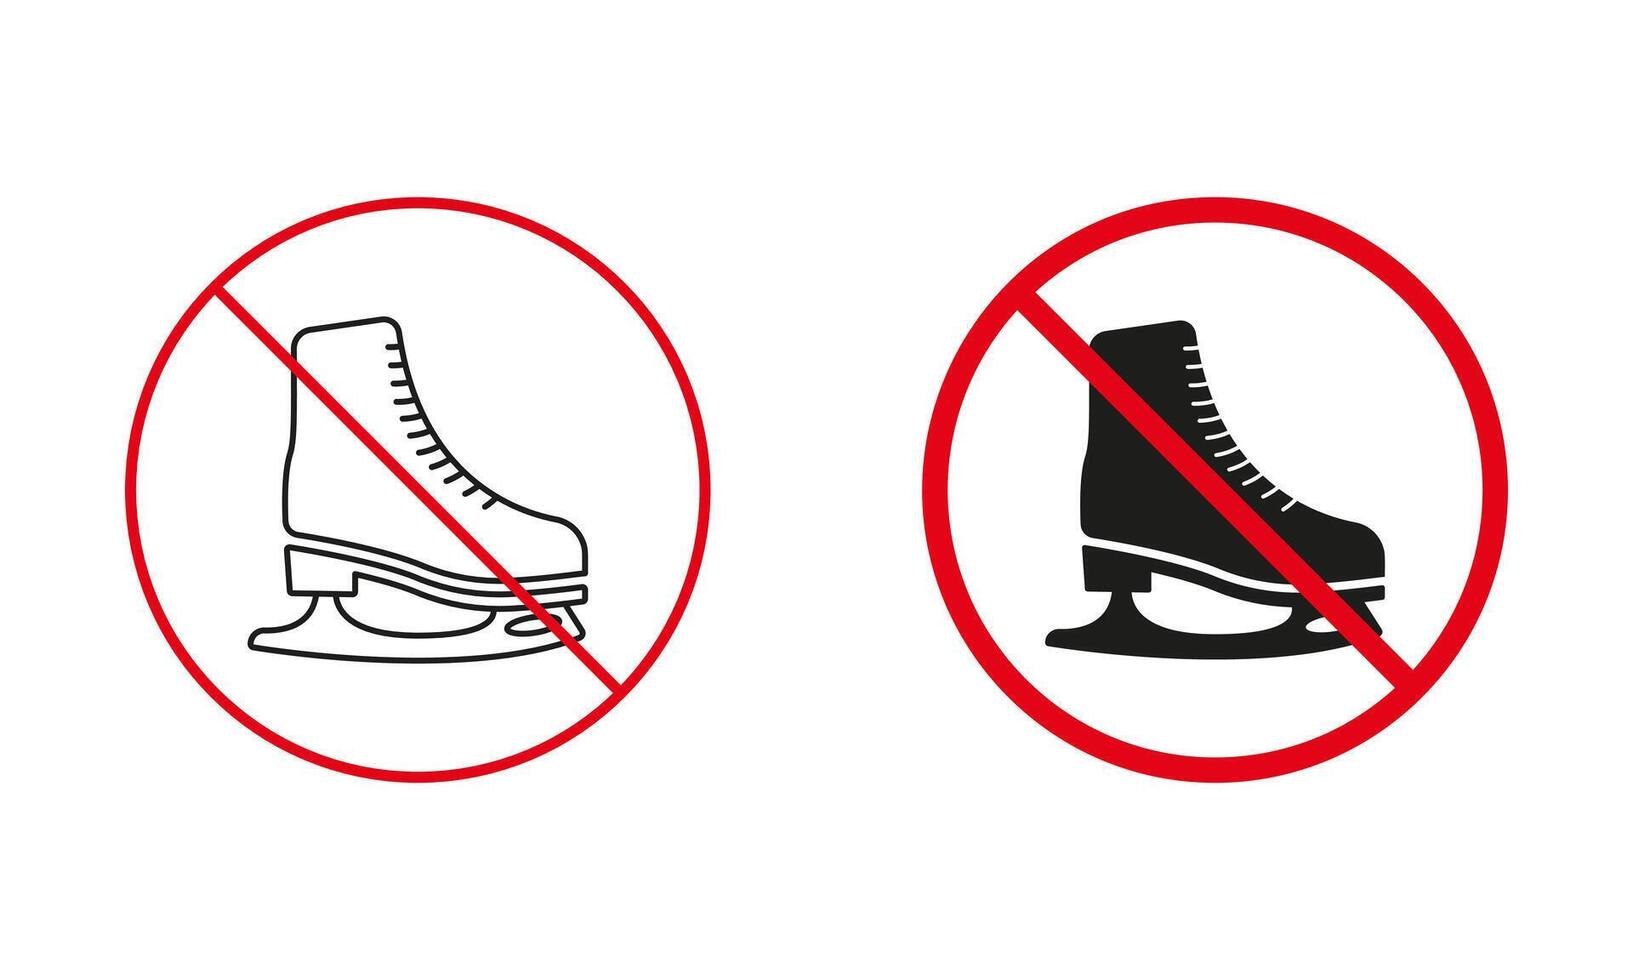 Rink Area Recreation Warning Sign Set. Figure Skating Not Allowed, Skate Prohibit Line and Silhouette Icons. Ice Skating Red Circle Symbol. Isolated Vector Illustration